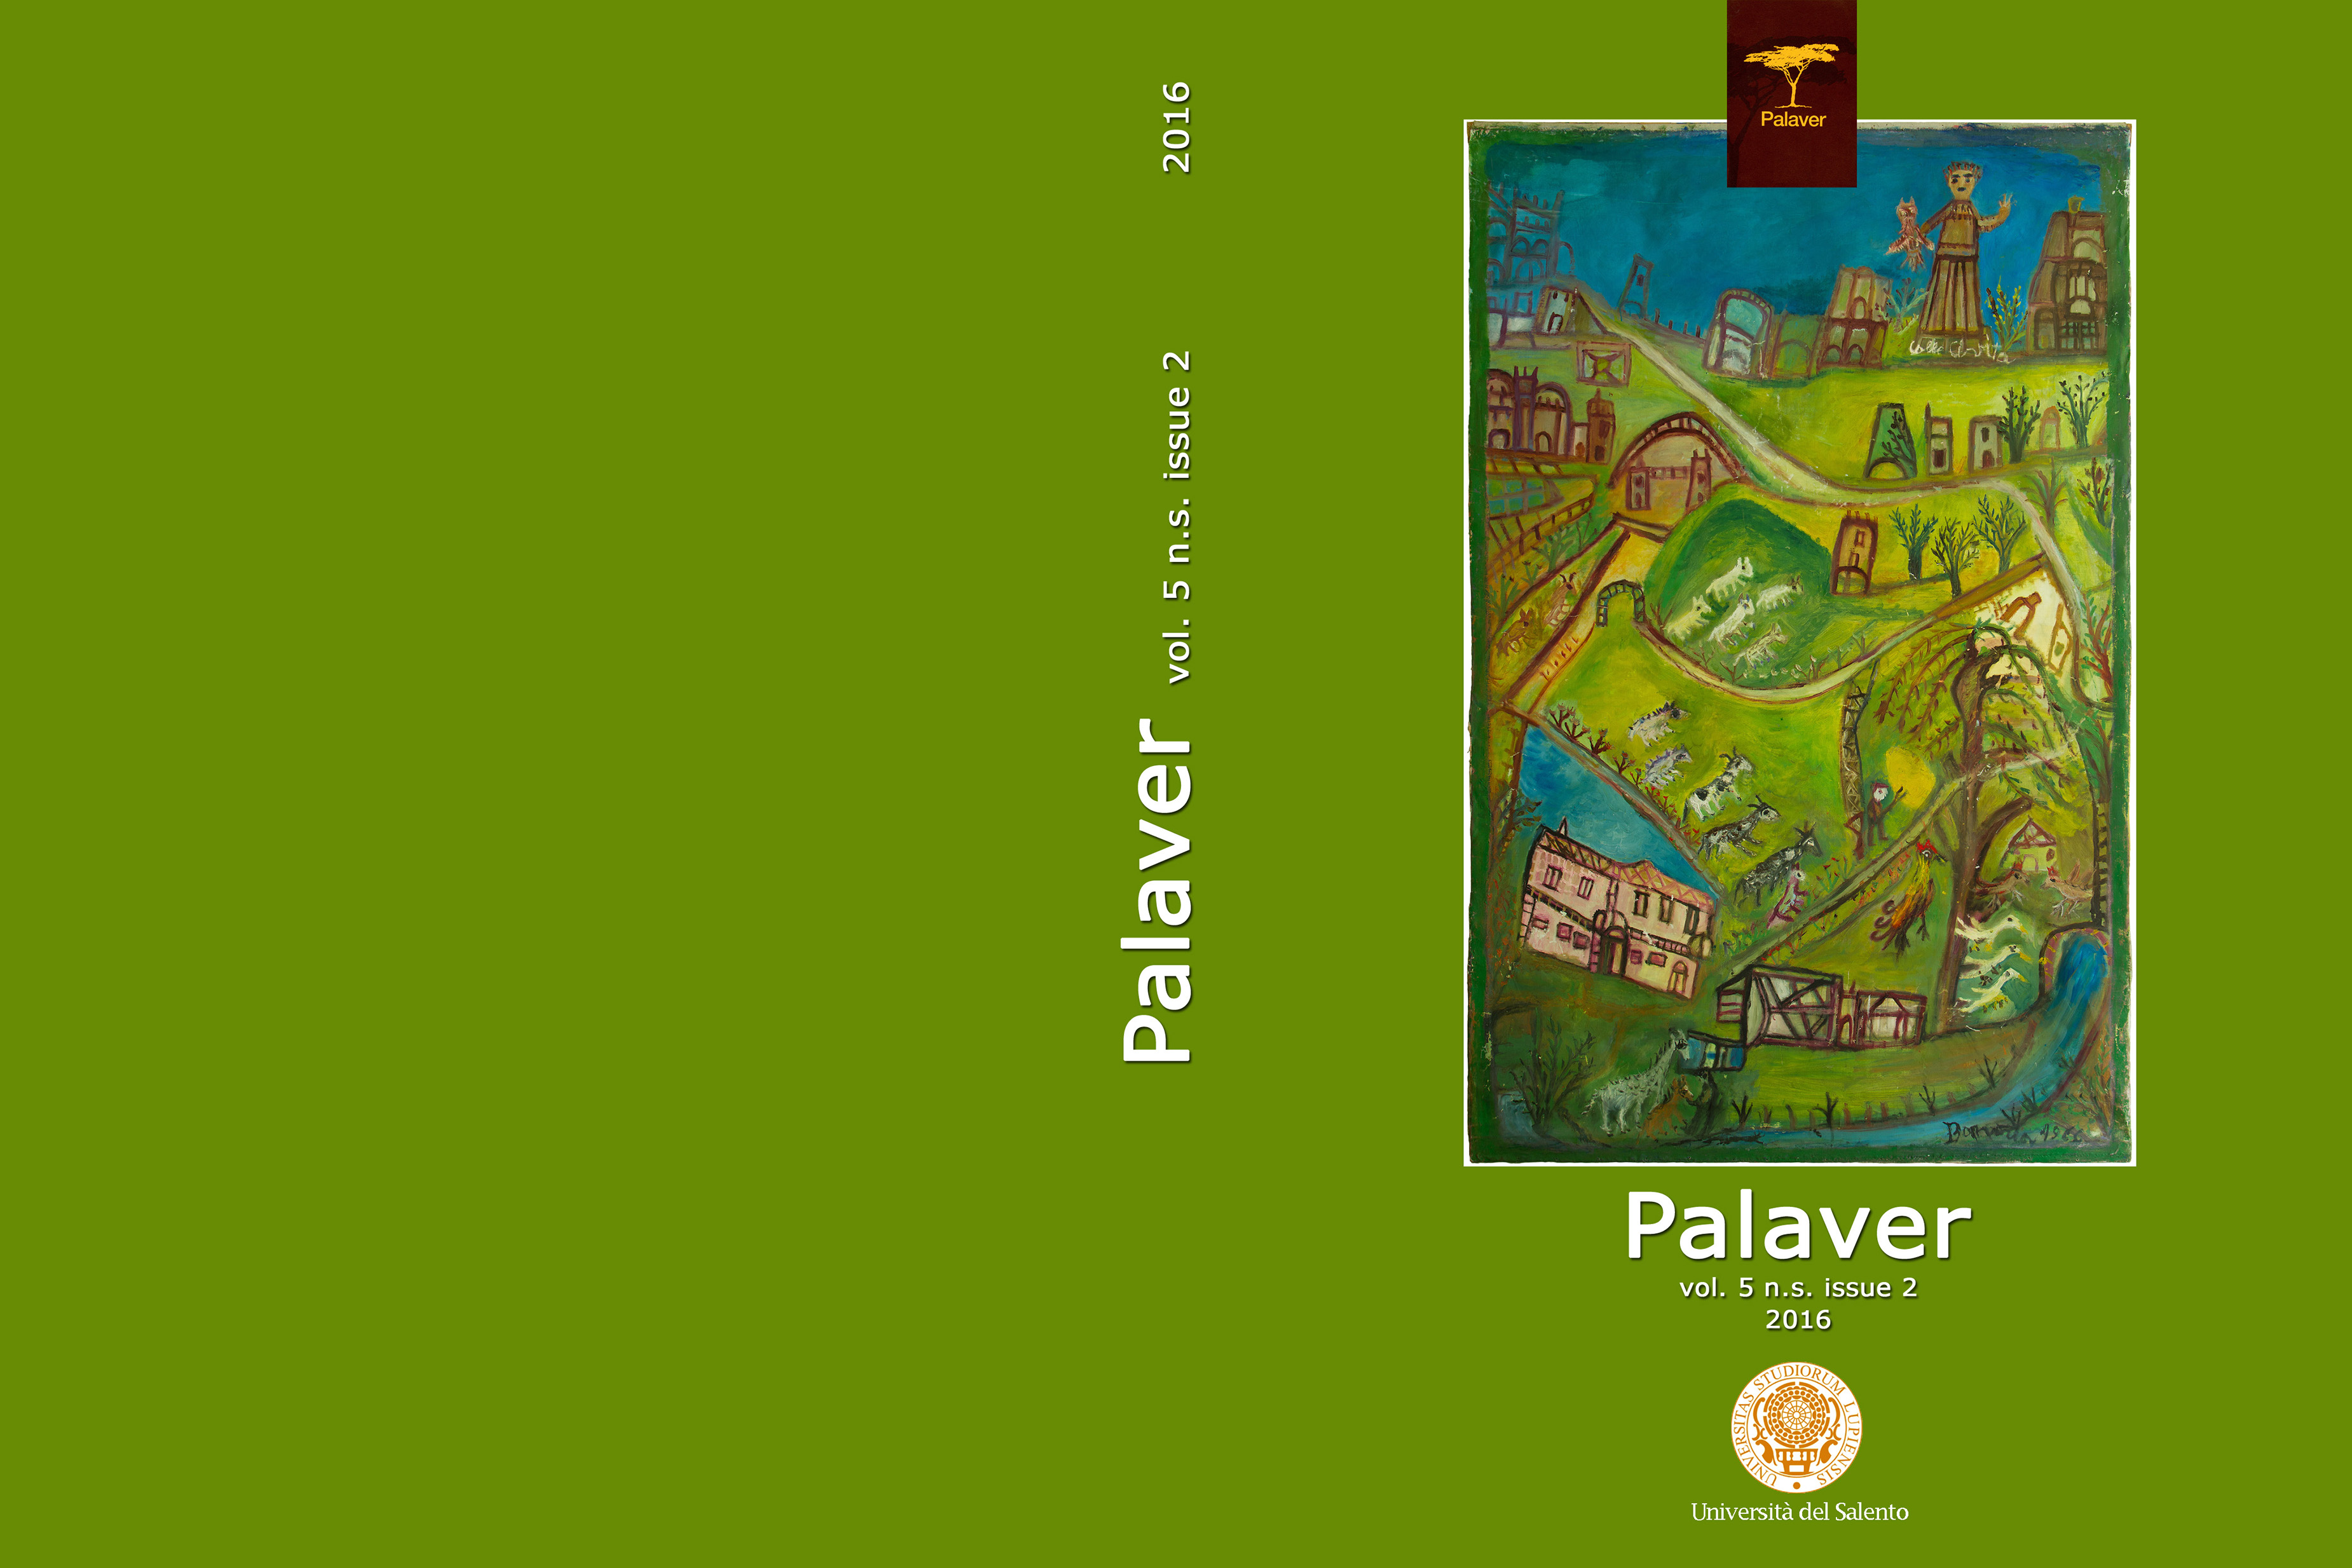  Palaver - Volume 5 n.s., Issue 2 (2016) - Covere-ISSN: 2280-4250